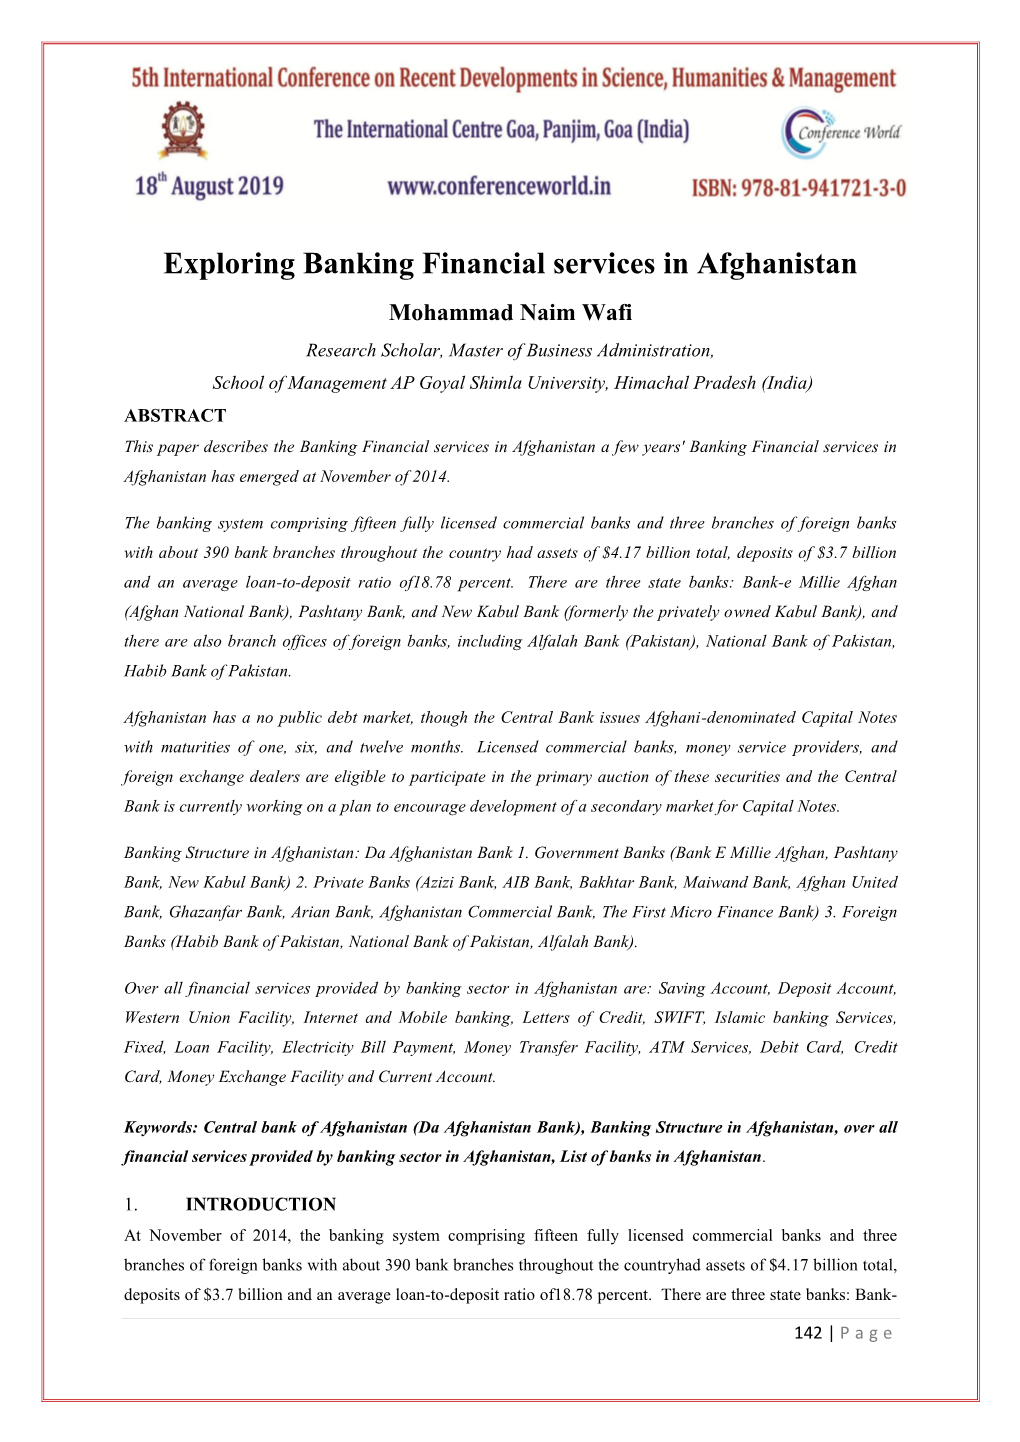 Exploring Banking Financial Services in Afghanistan